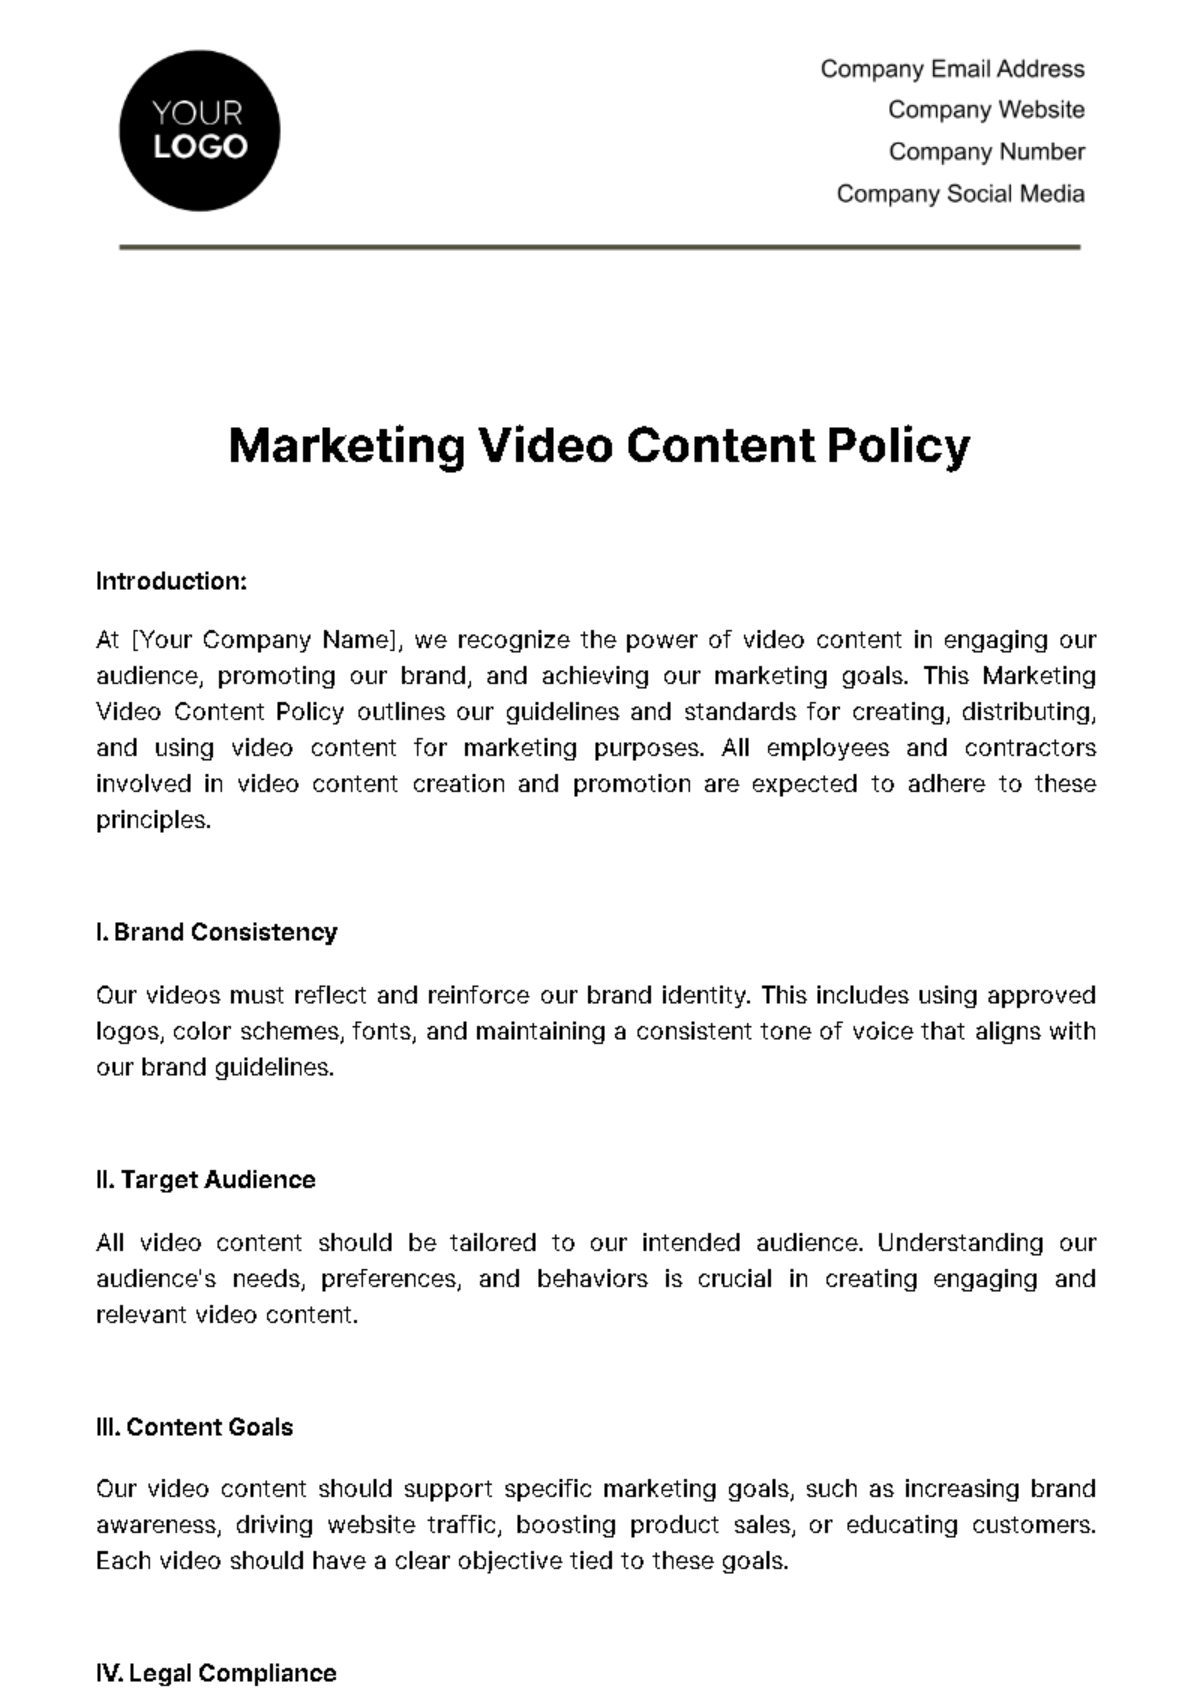 Marketing Video Content Policy Template